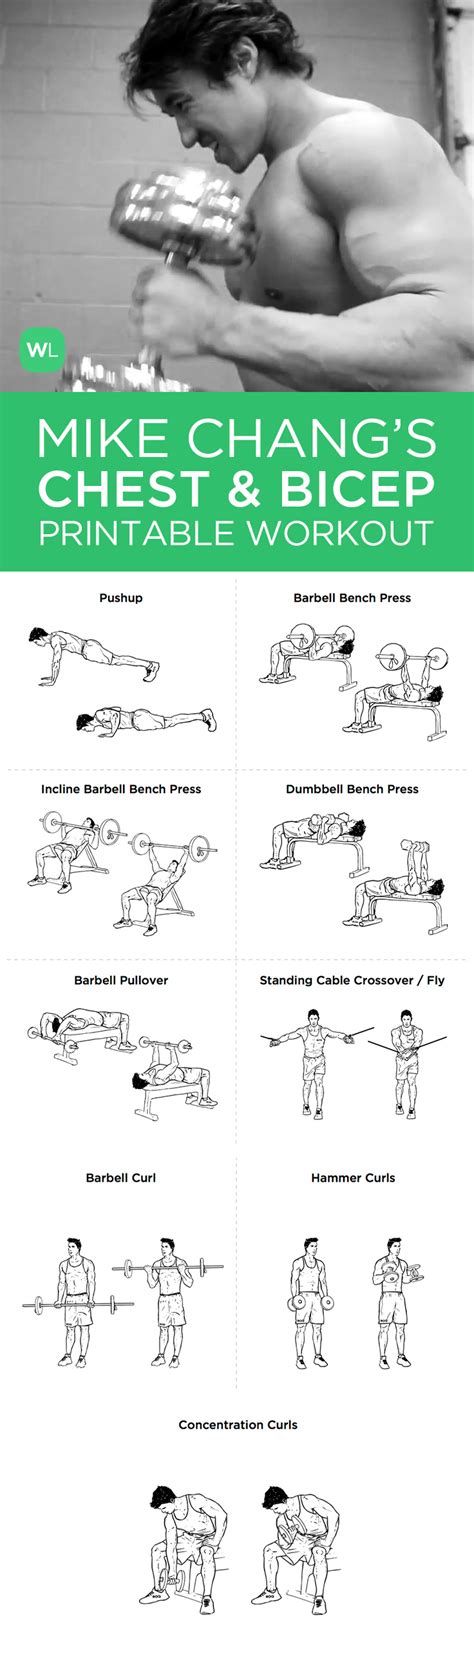 5 Day Gym Workout Steps Image Pdf For Build Muscle Fitness And